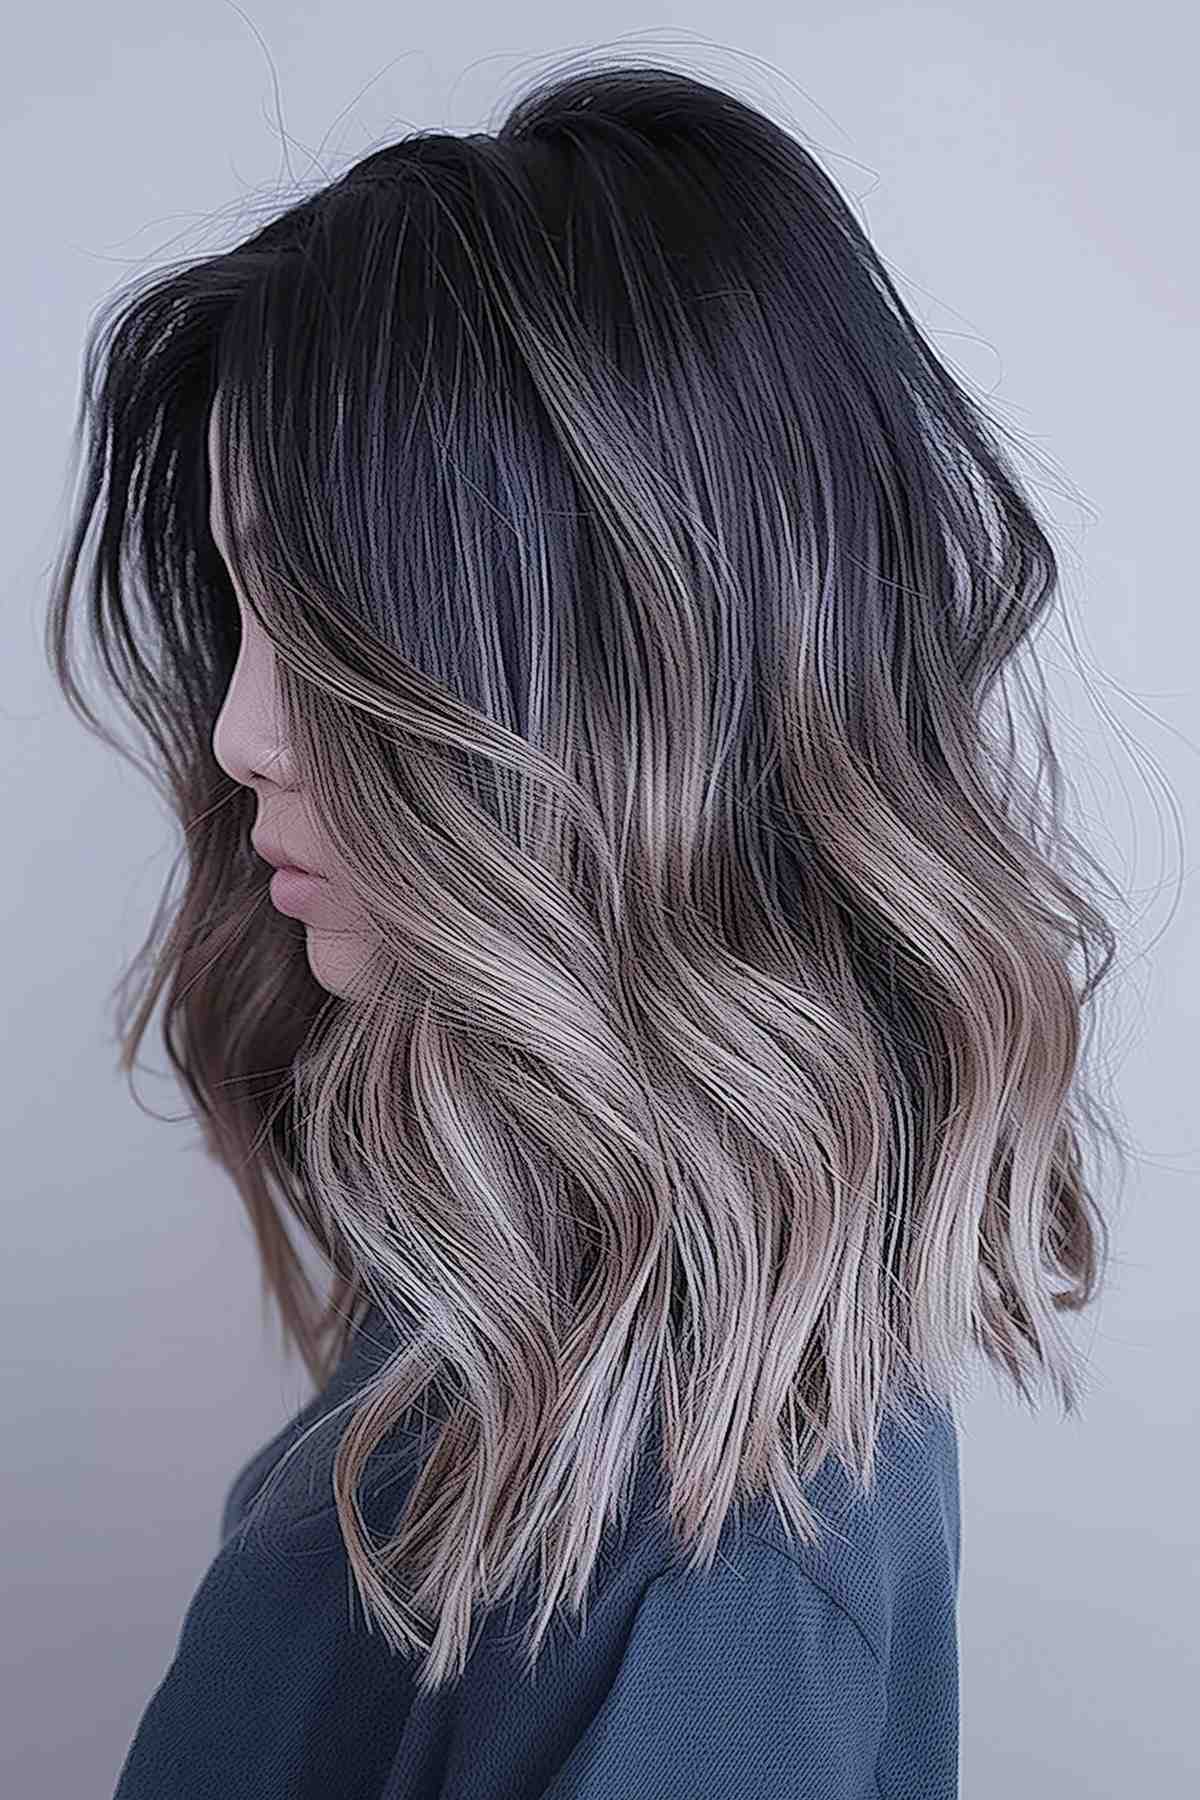 Medium-length mushroom brown hair with soft ombre transition to lighter tips, styled into loose waves.